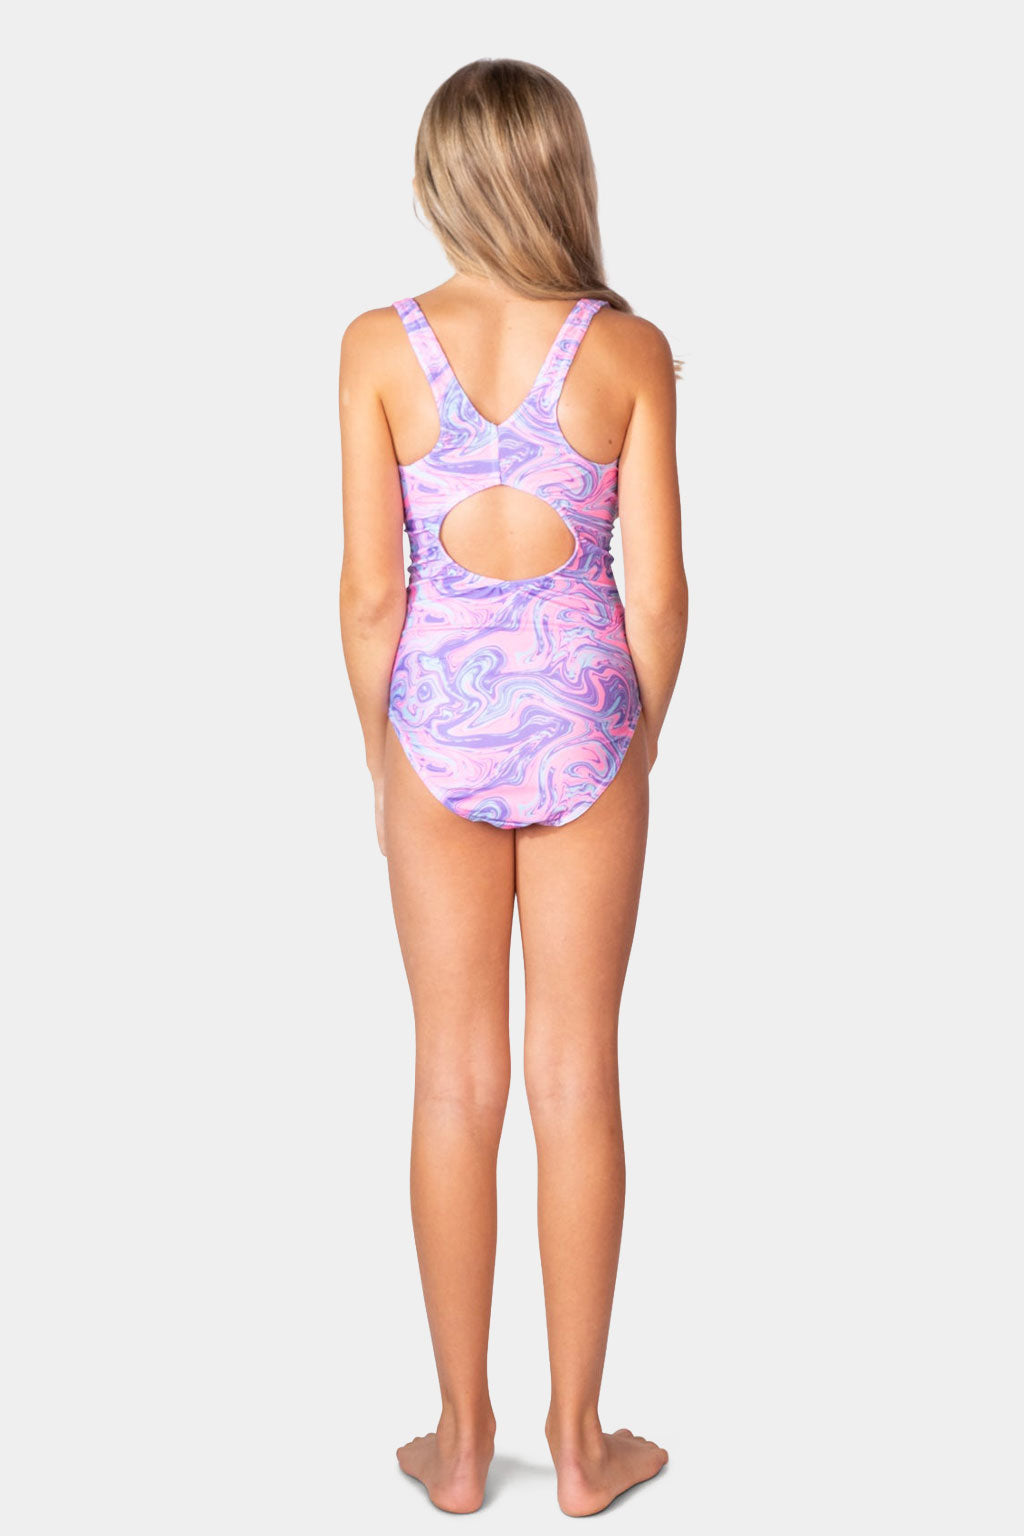 Coega - Girls Youth Competition Swim Suit